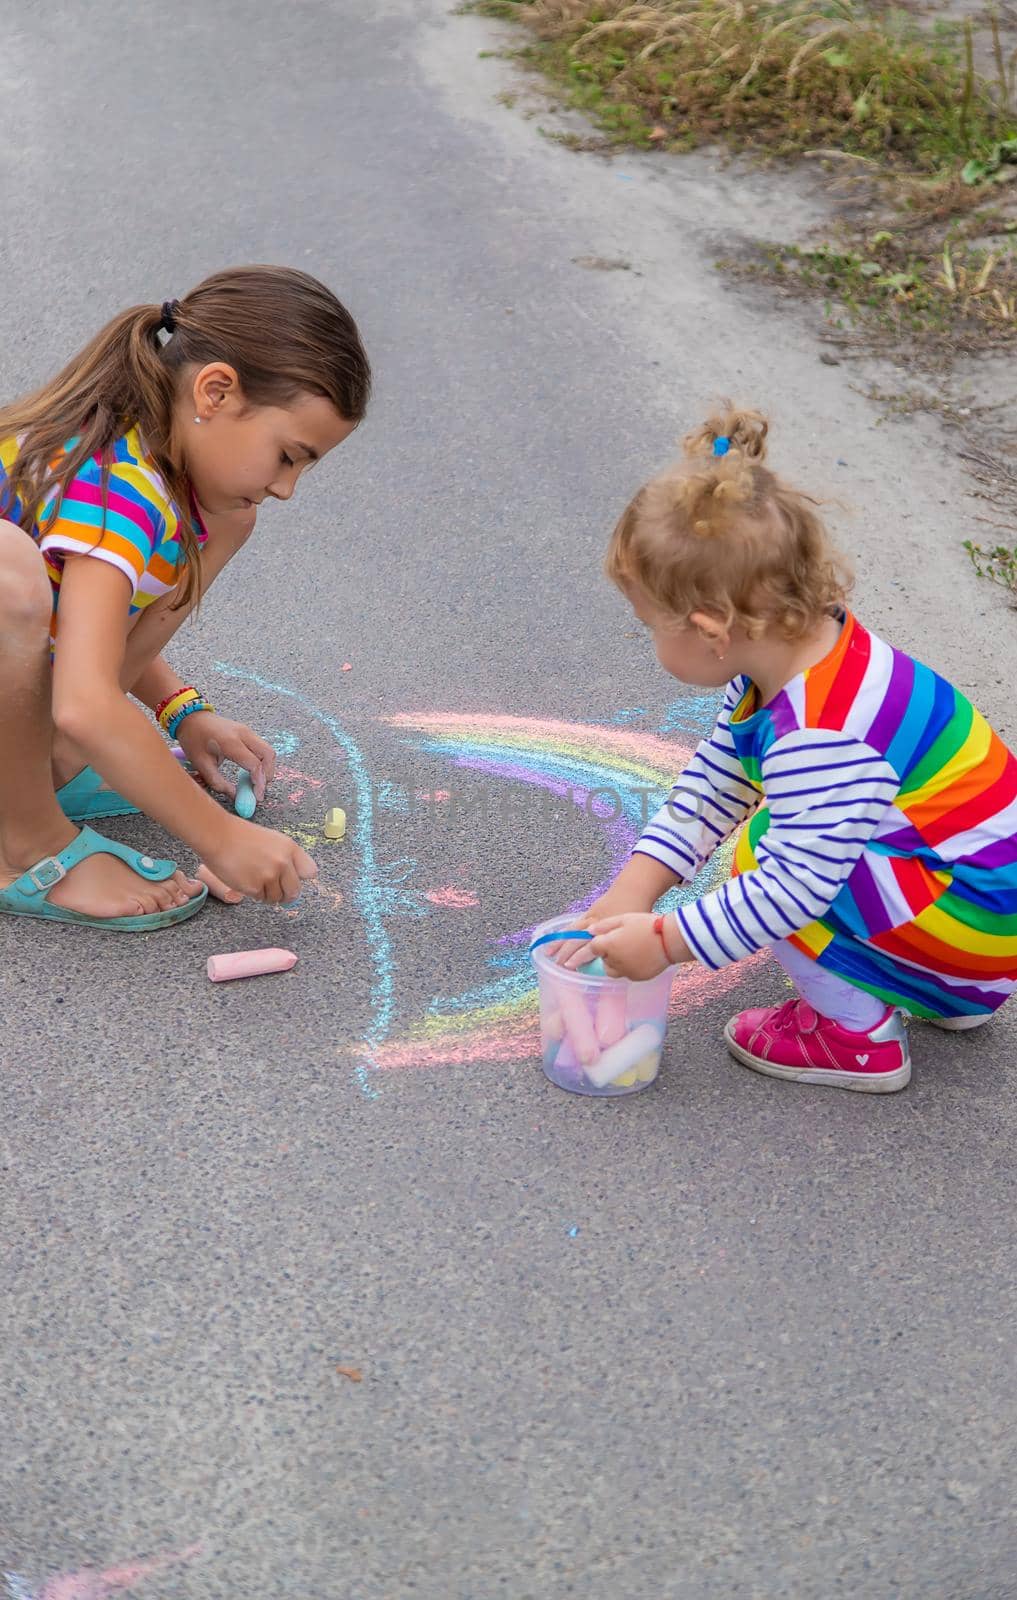 The child draws with chalk on the pavement. Selective focus. Kid.